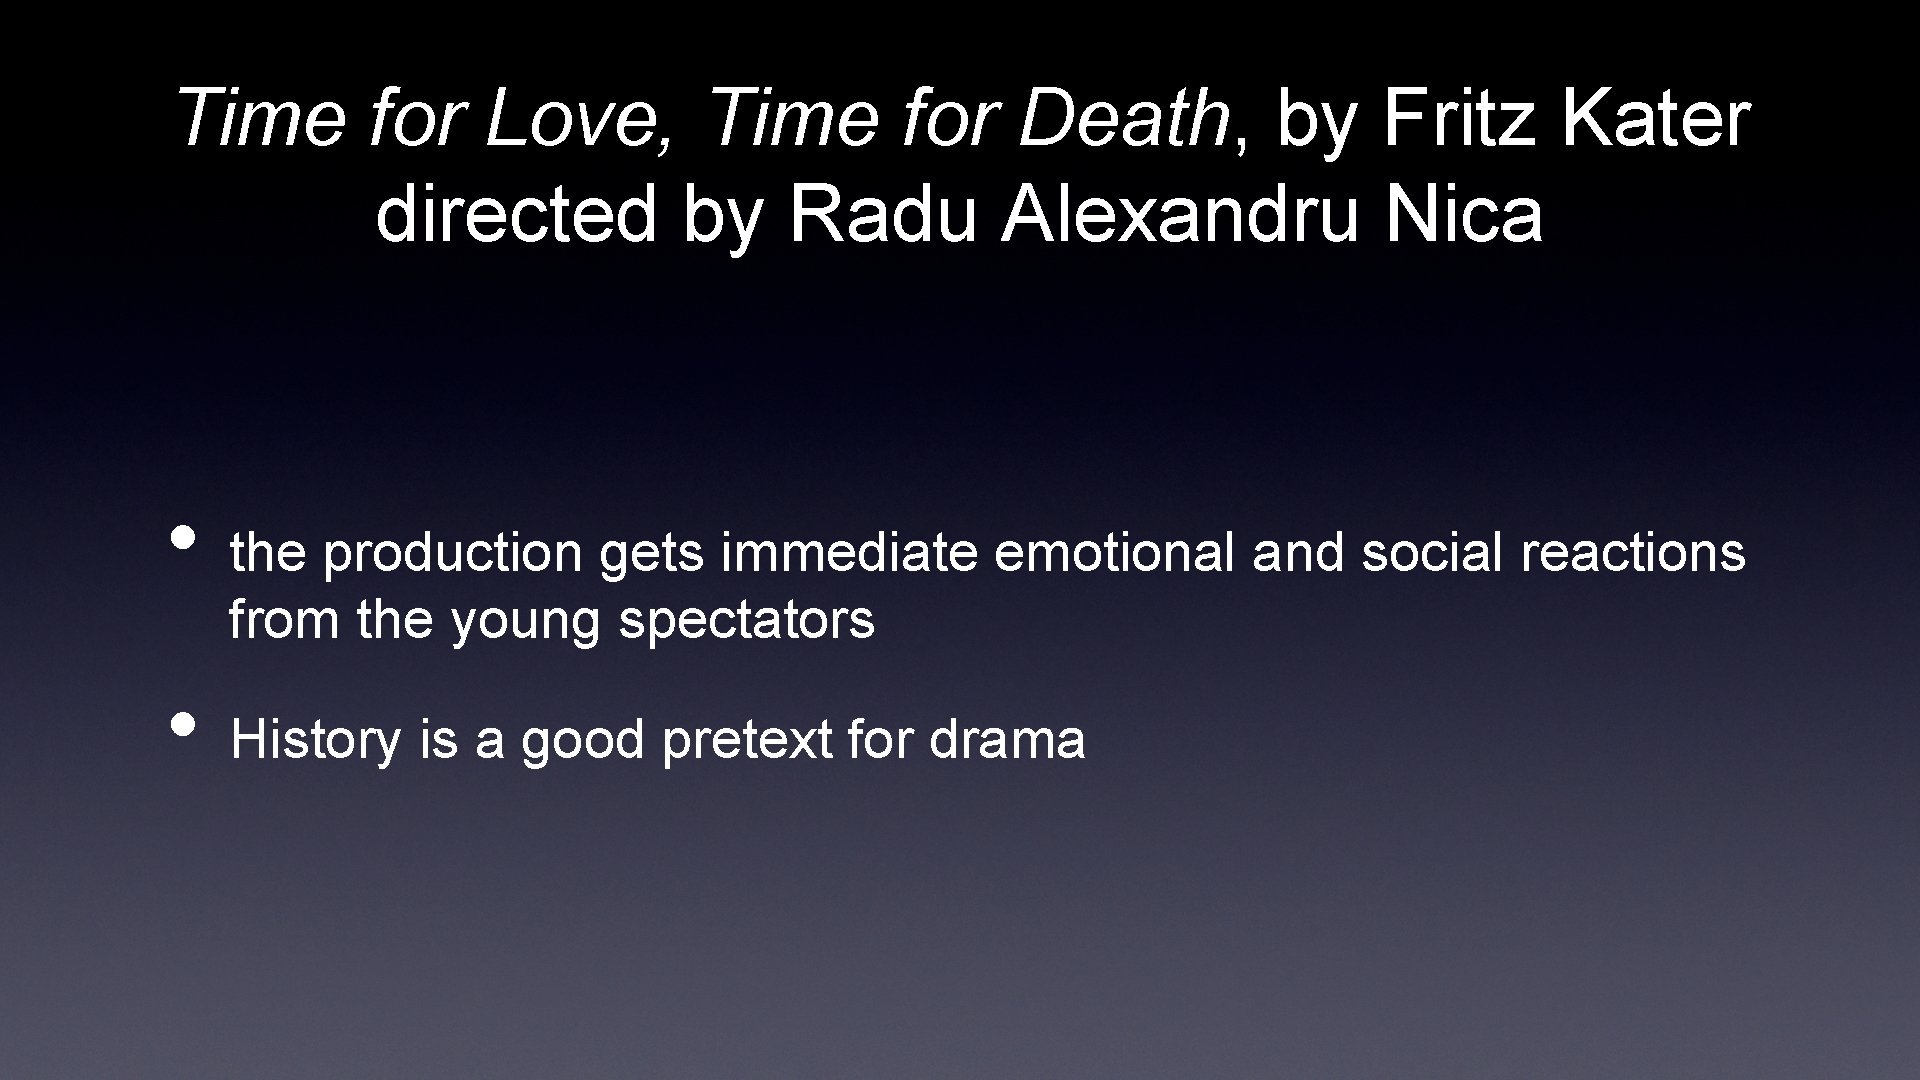 Time for Love, Time for Death, by Fritz Kater directed by Radu Alexandru Nica